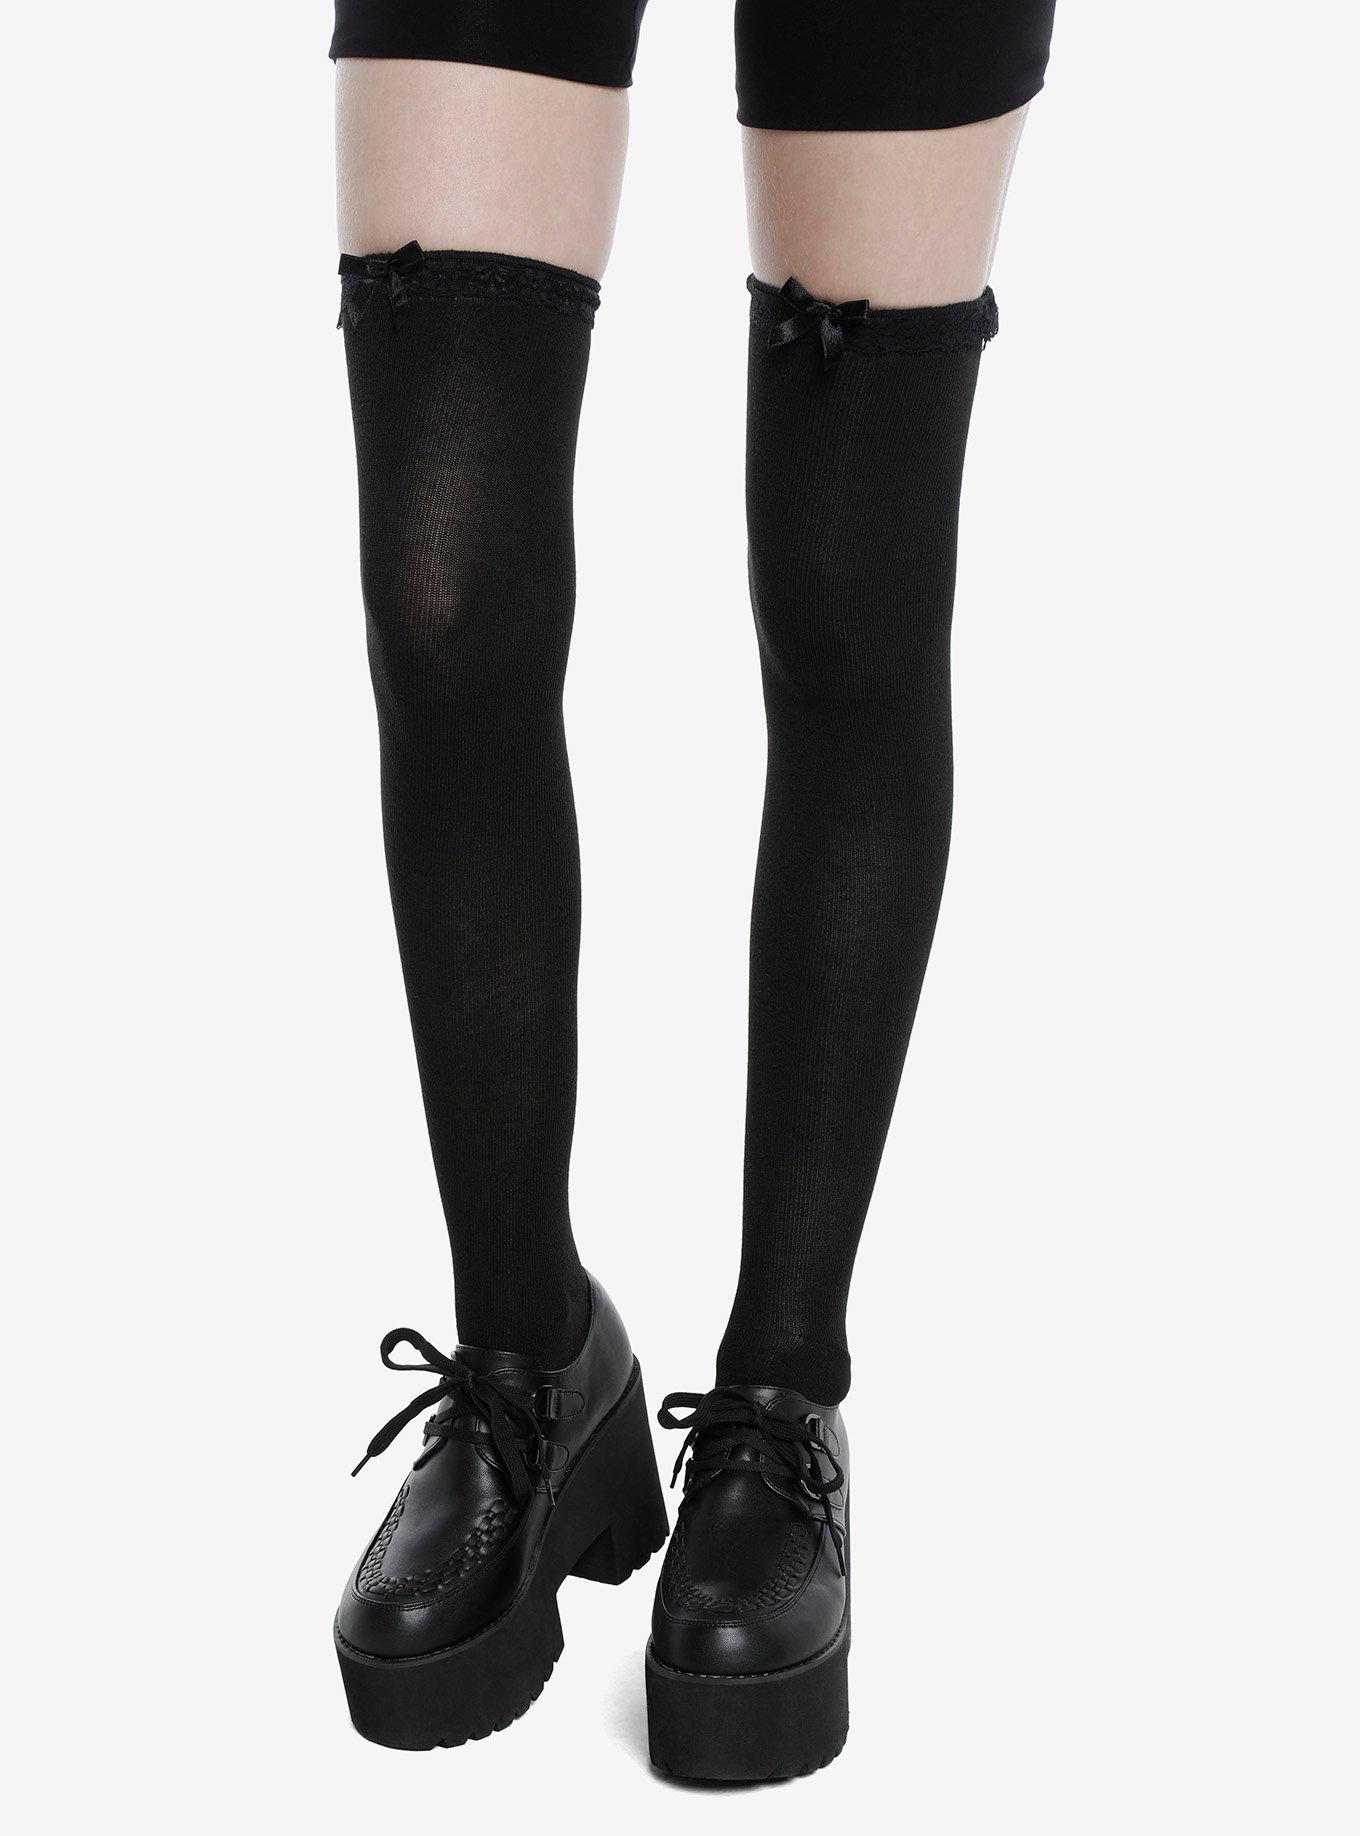 Black Lace & Bow Over-The-Knee Socks, , hi-res